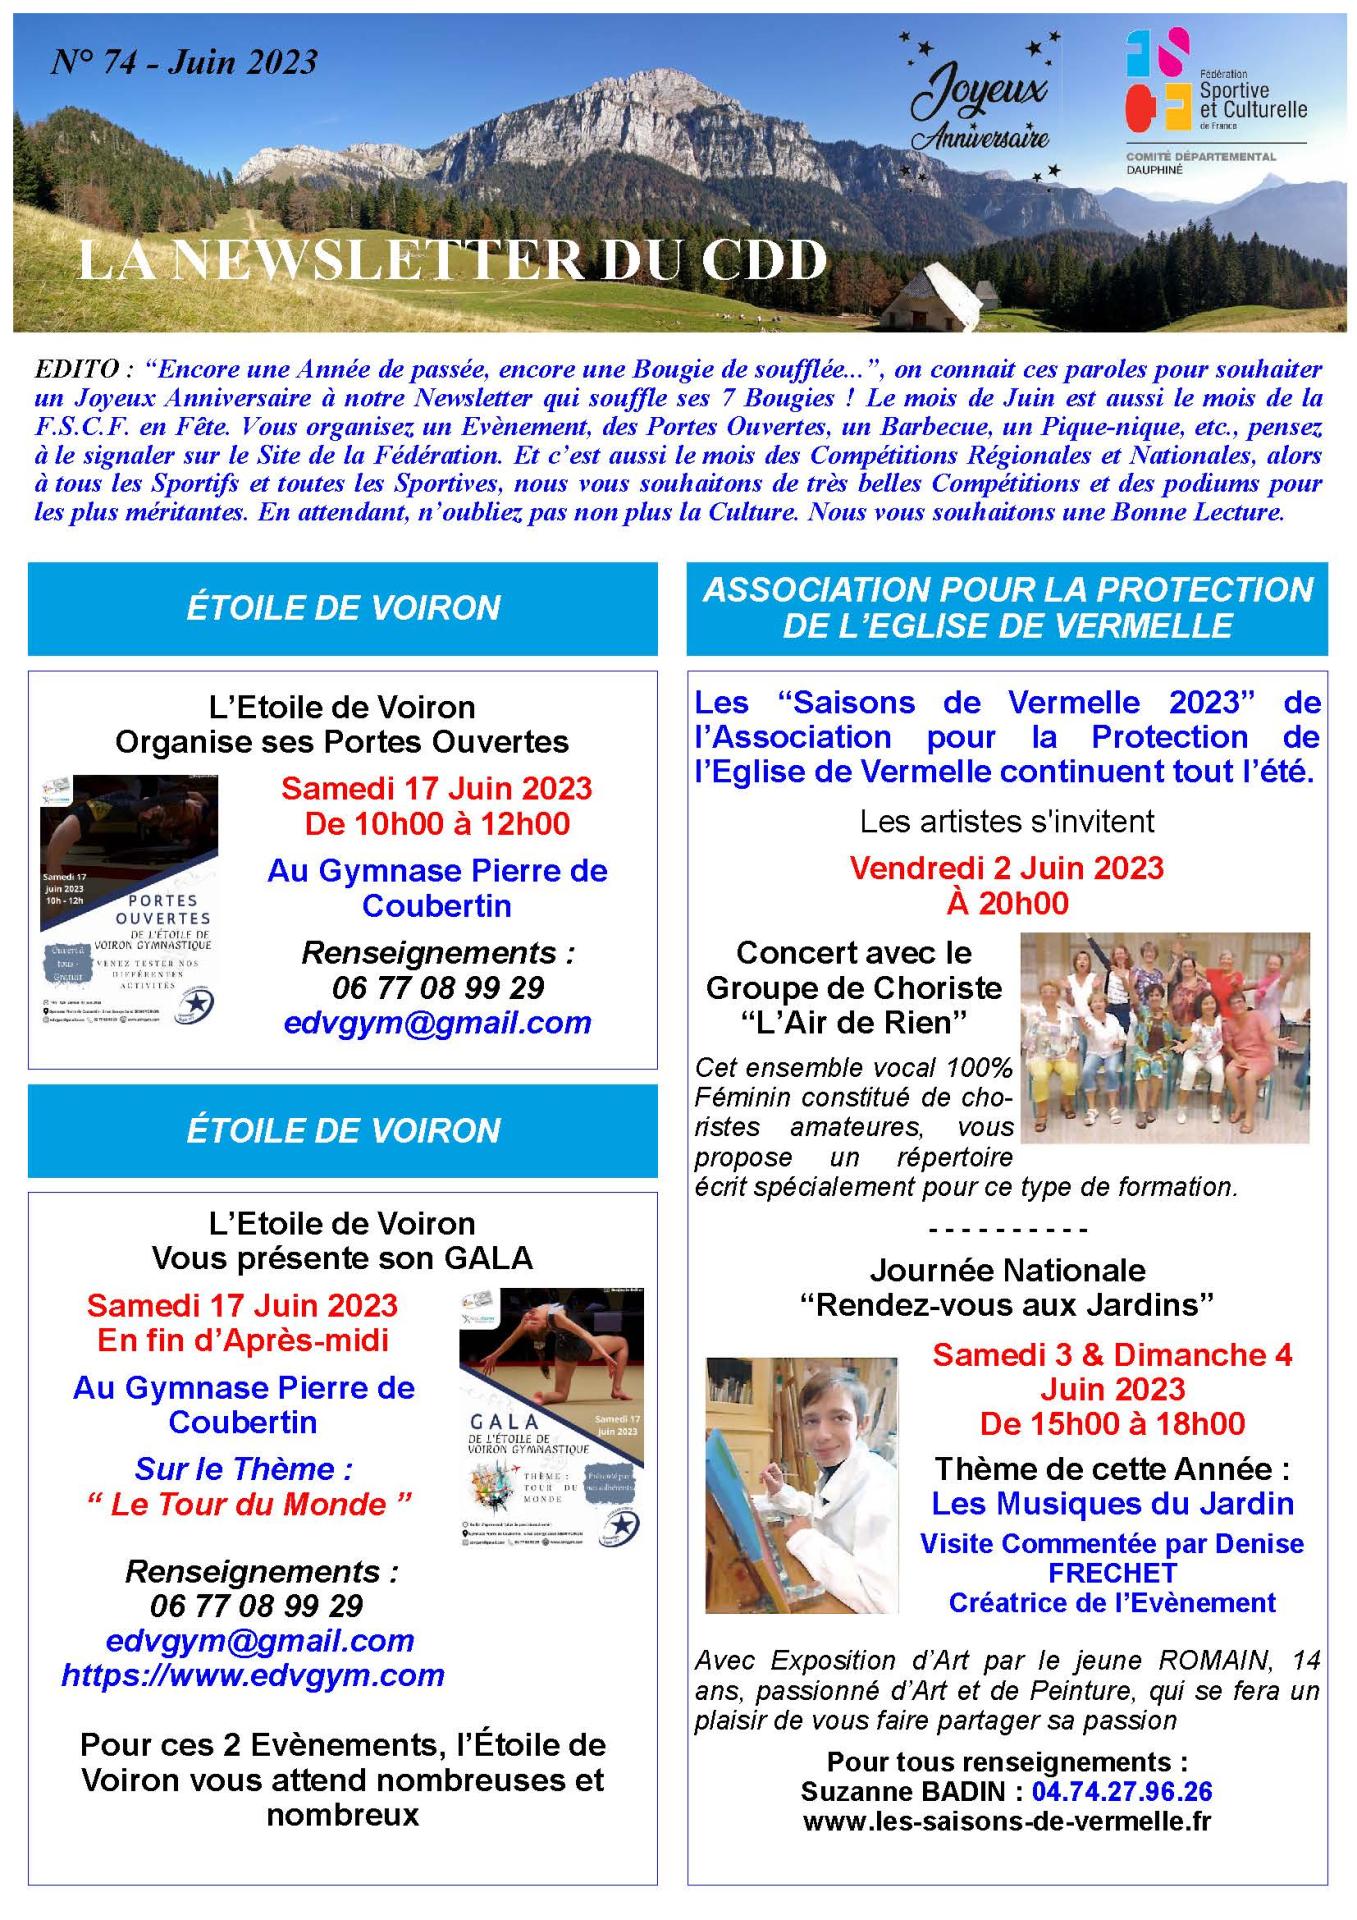 Newsletter n74 06 2023 page 1